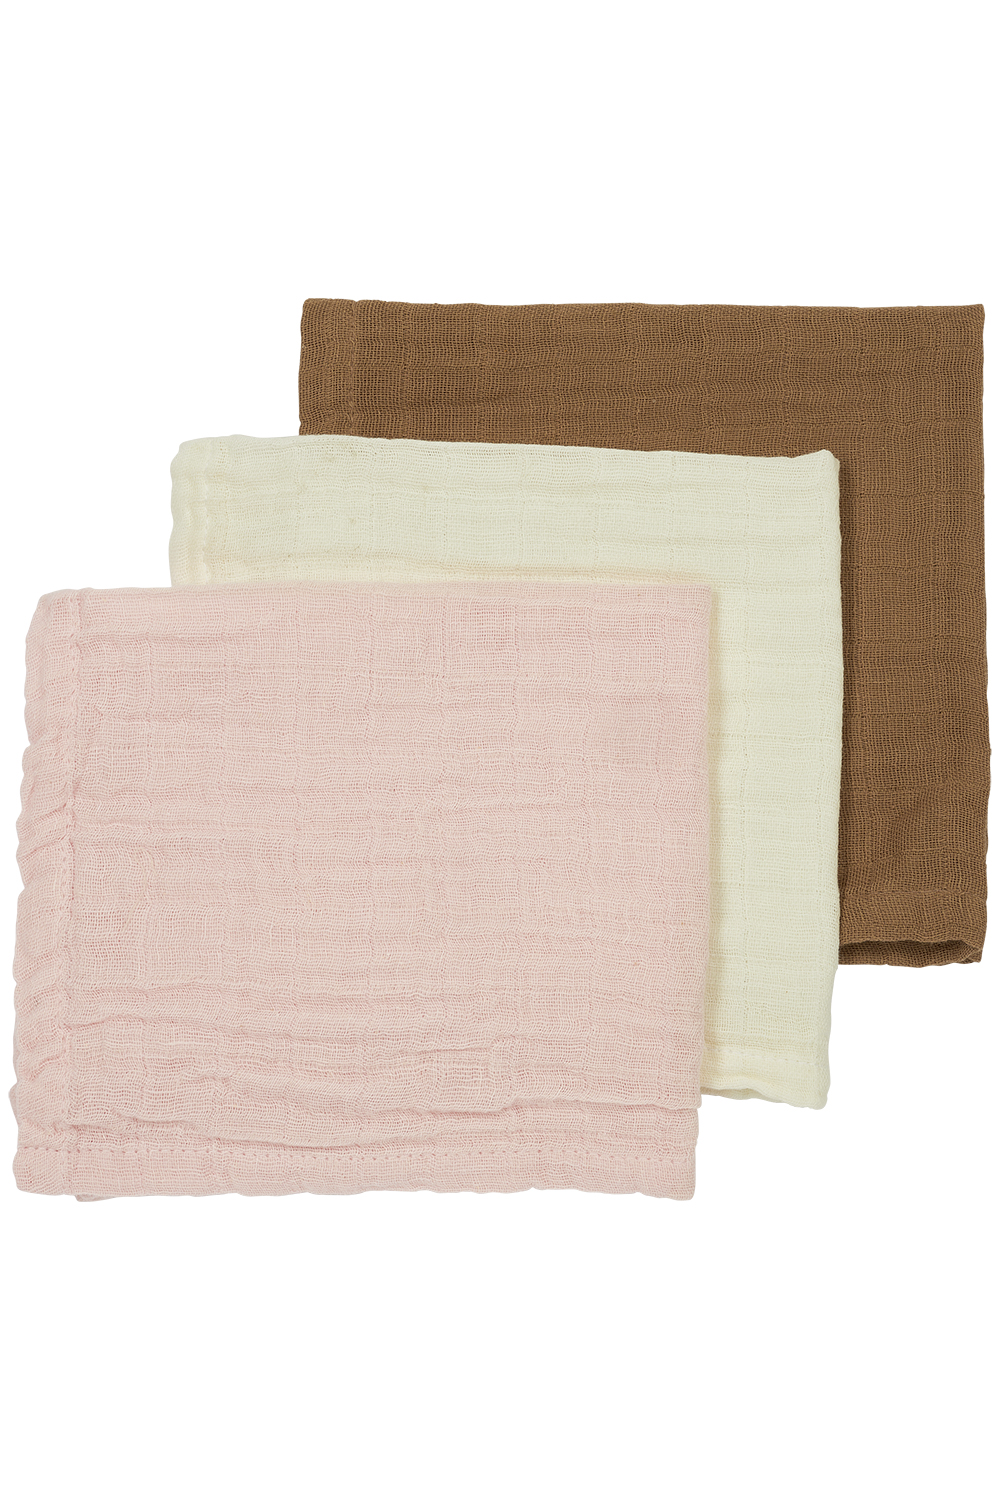 Spucktücher 3er pack pre-washed musselin Uni - offwhite/soft pink/toffee - 30x30cm